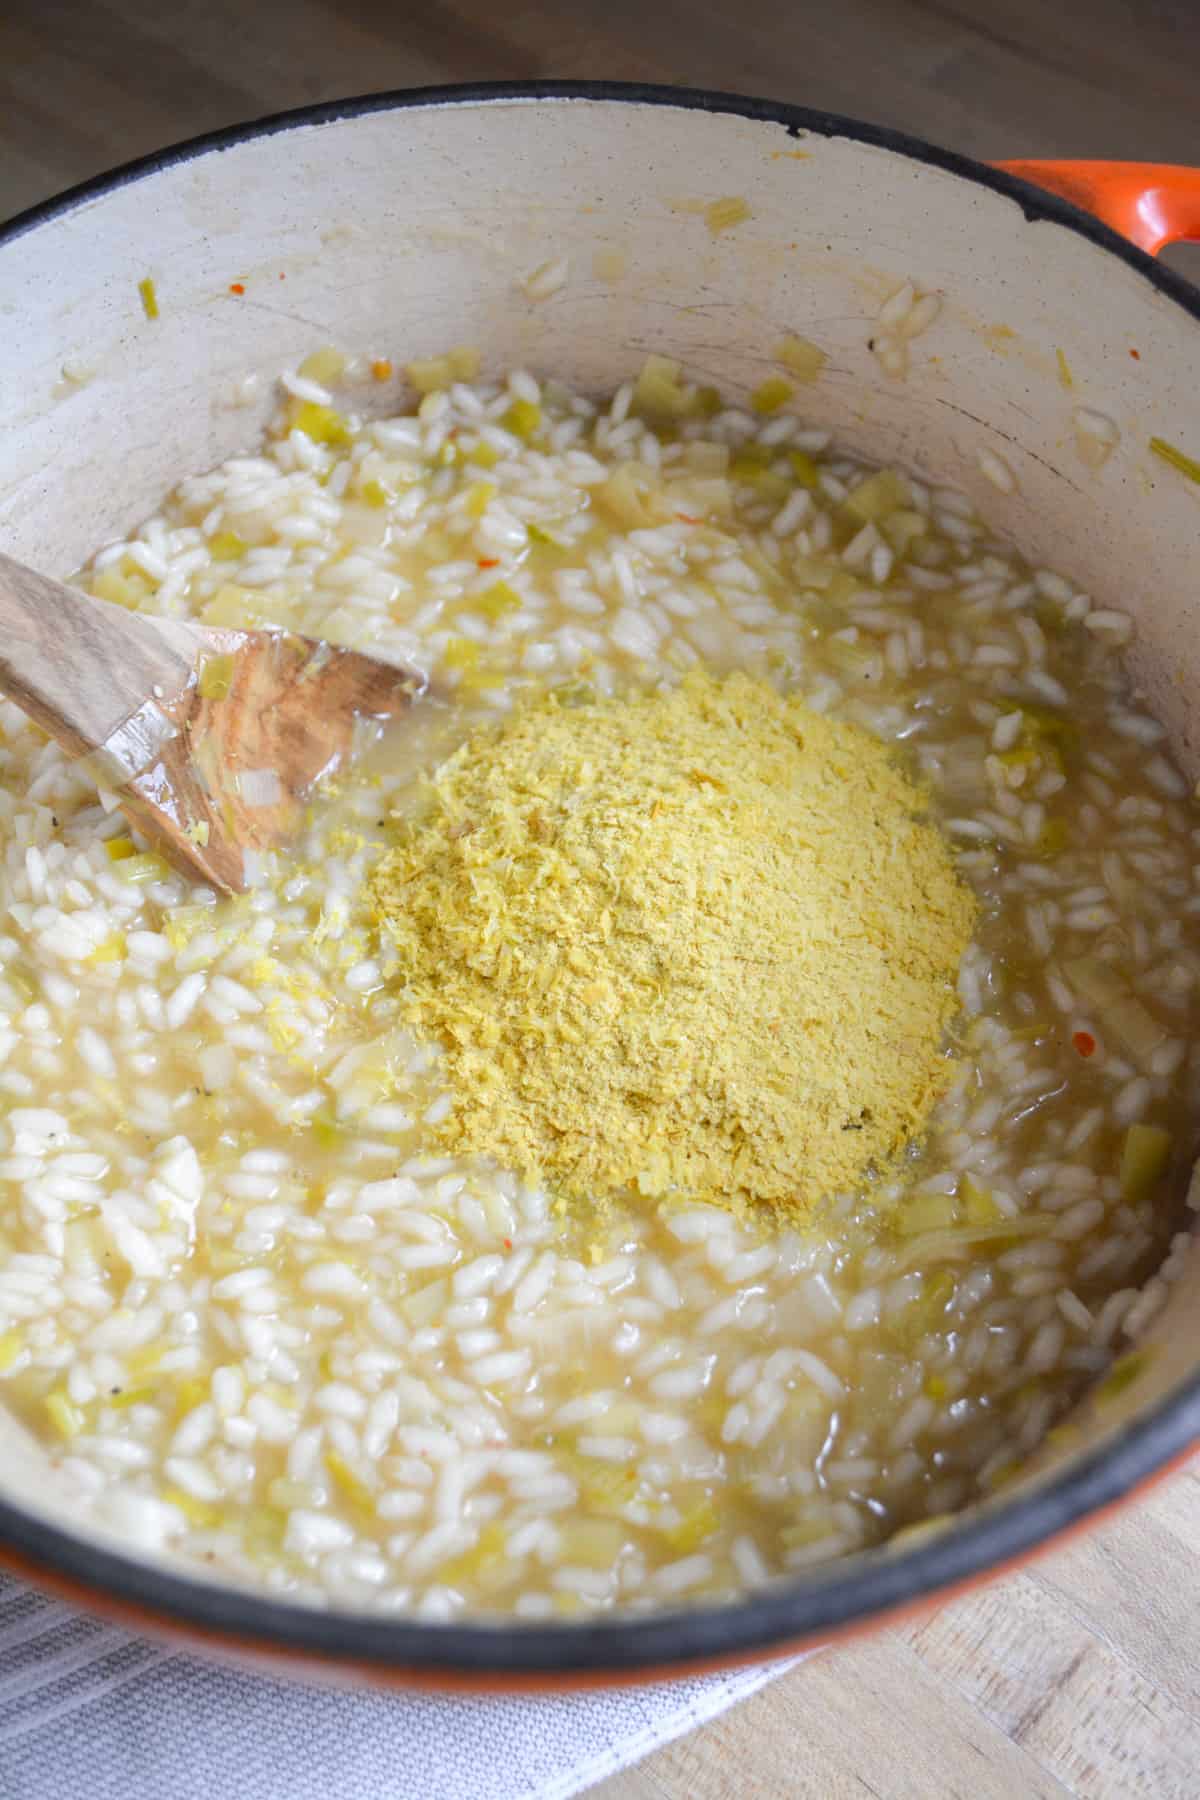 Finished risotto with lemon zest and nutritional yeast added into the pot.